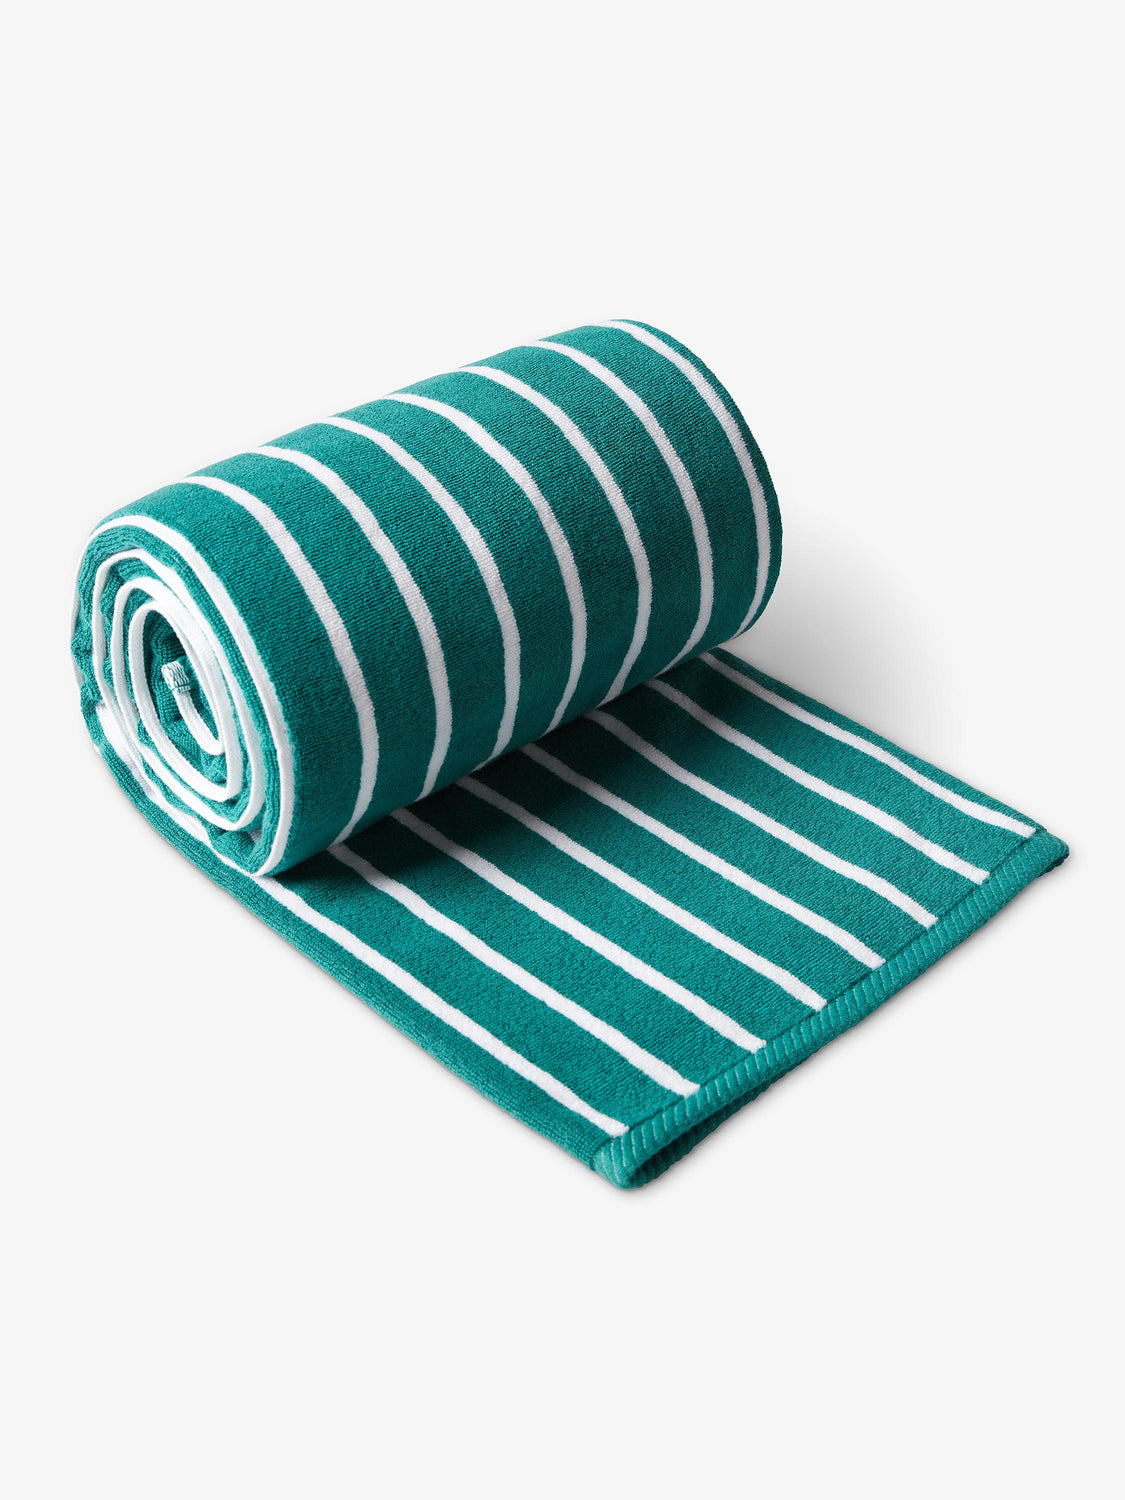 A rolled-up, green and white striped cabana beach towel. 